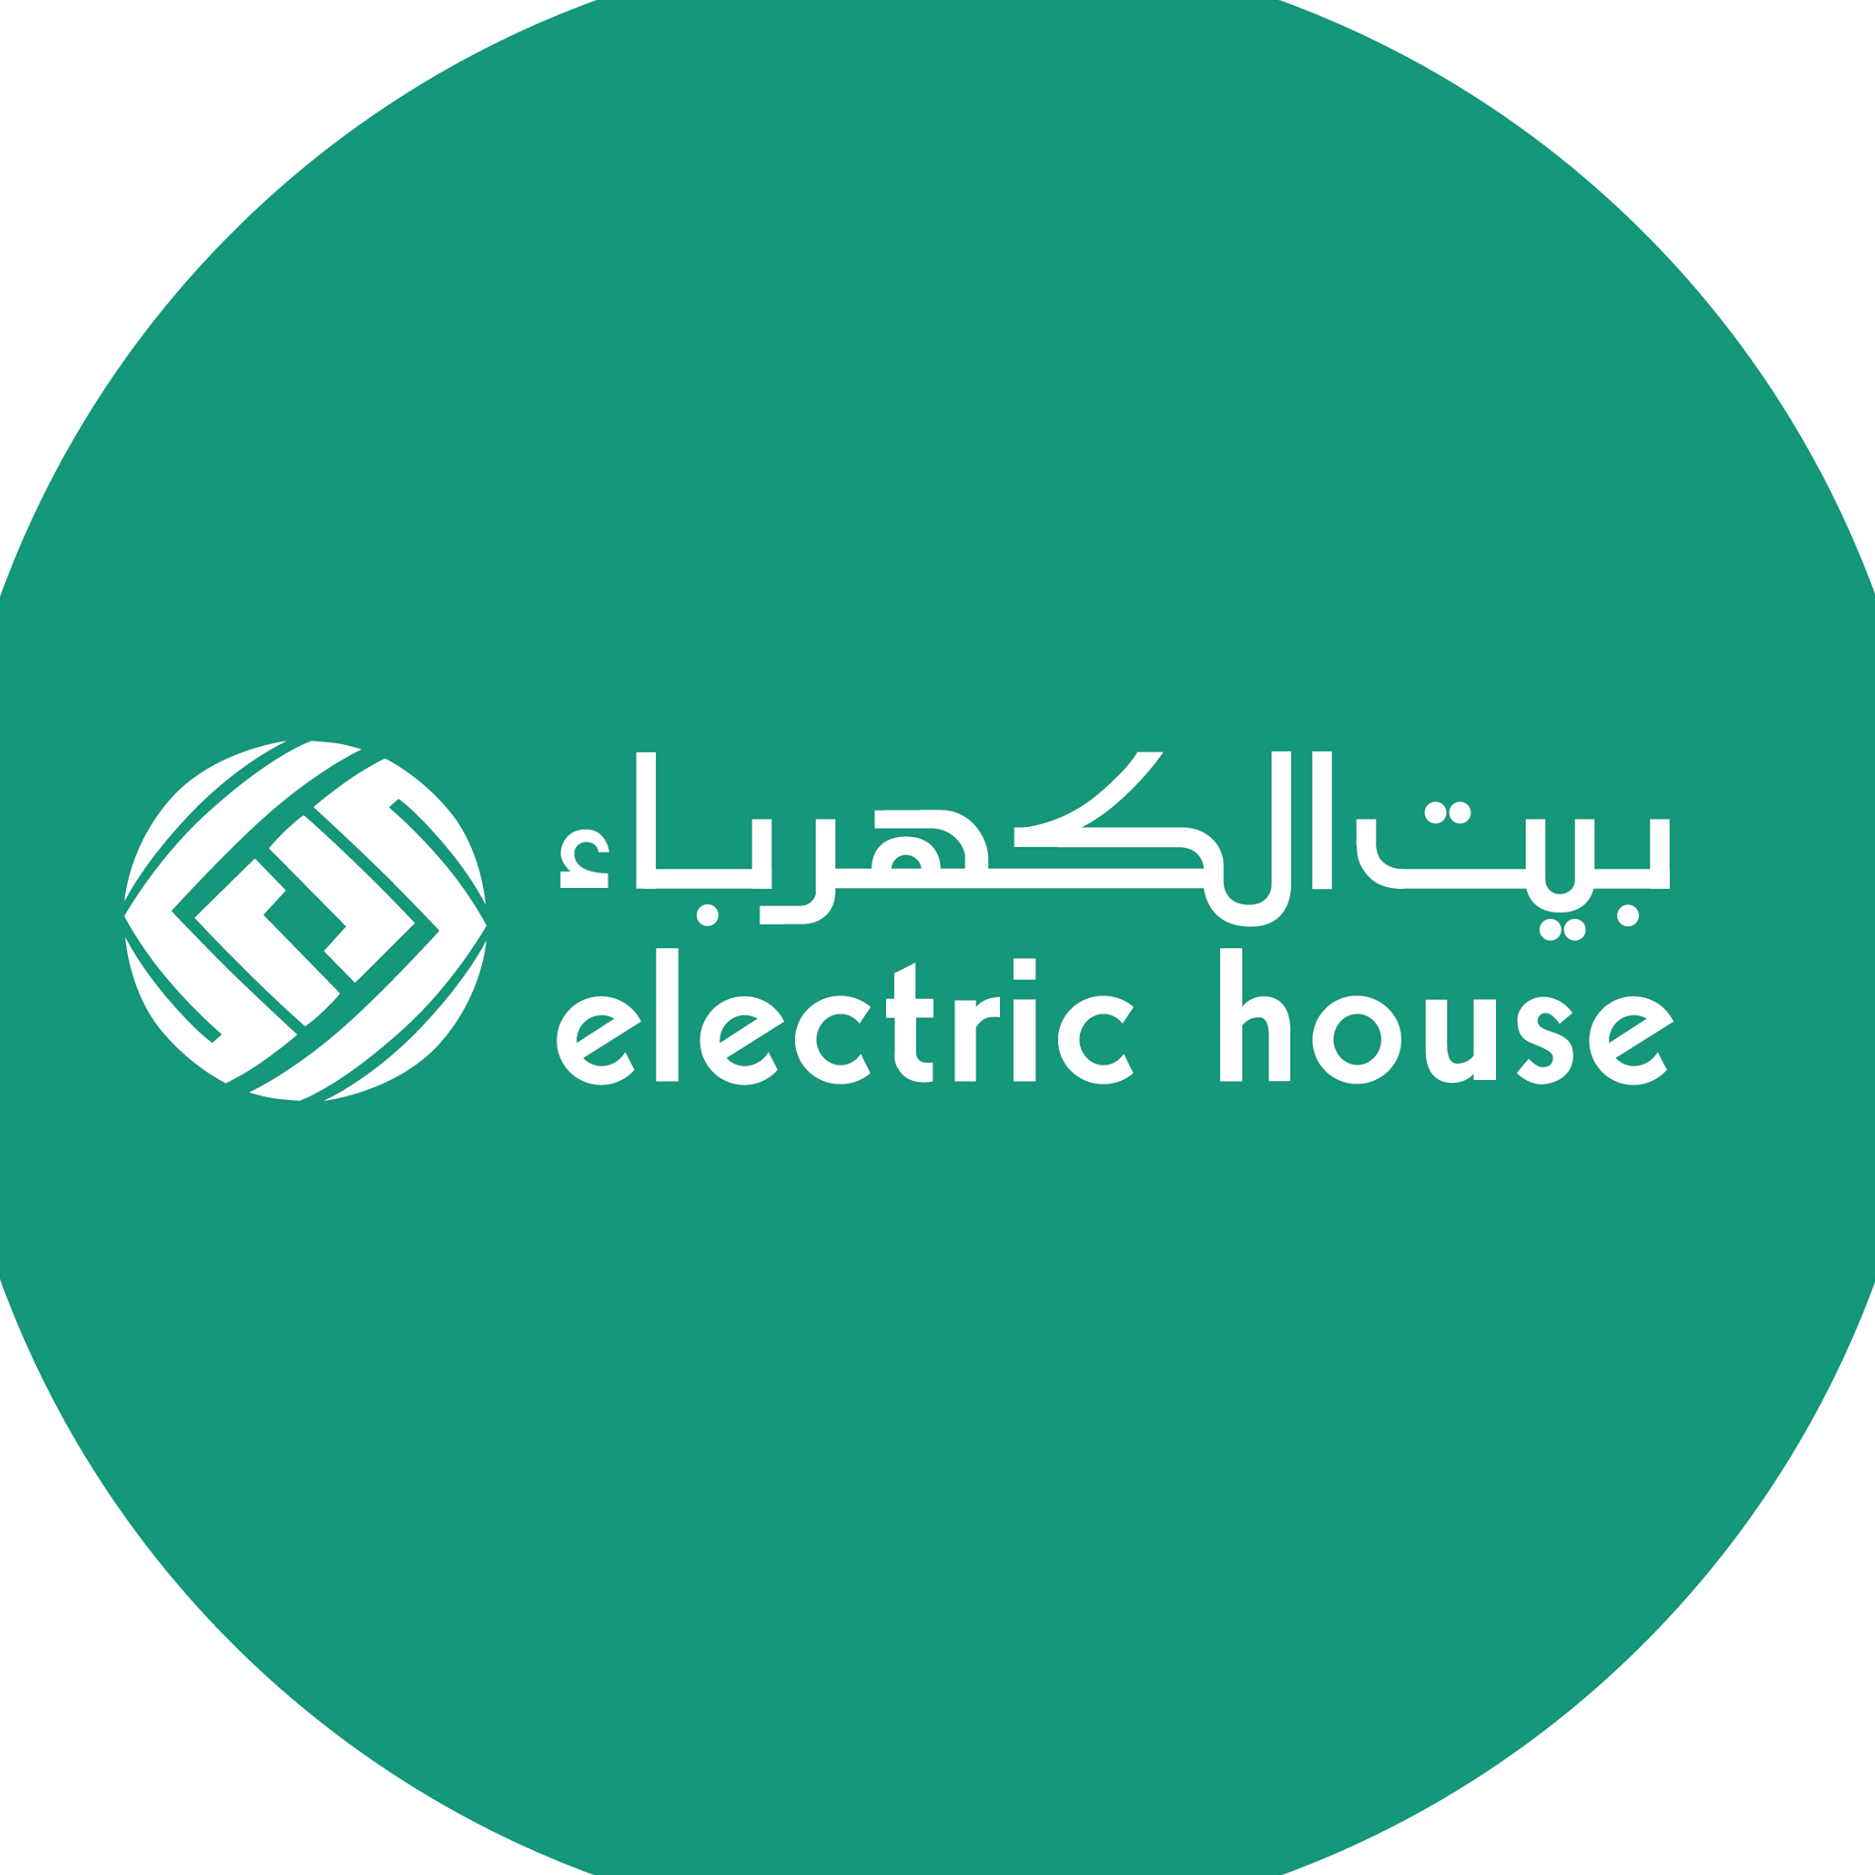 Electric house